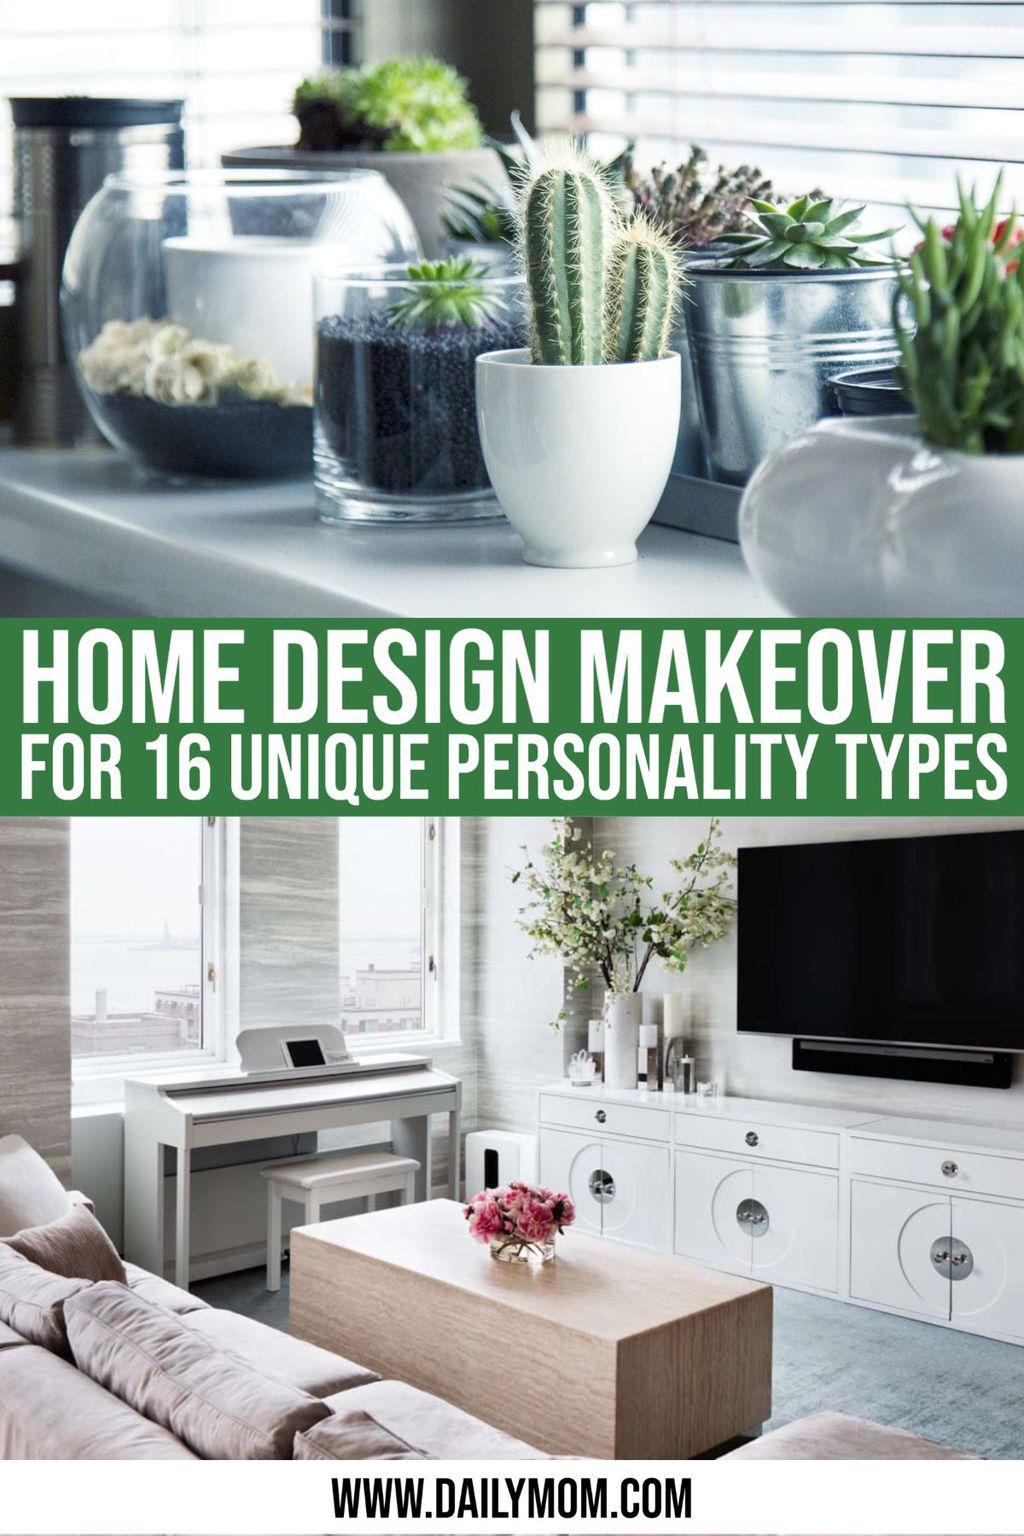 An Upscale Home Design Makeover For 16 Unique Personality Types: Which Mom Are You?